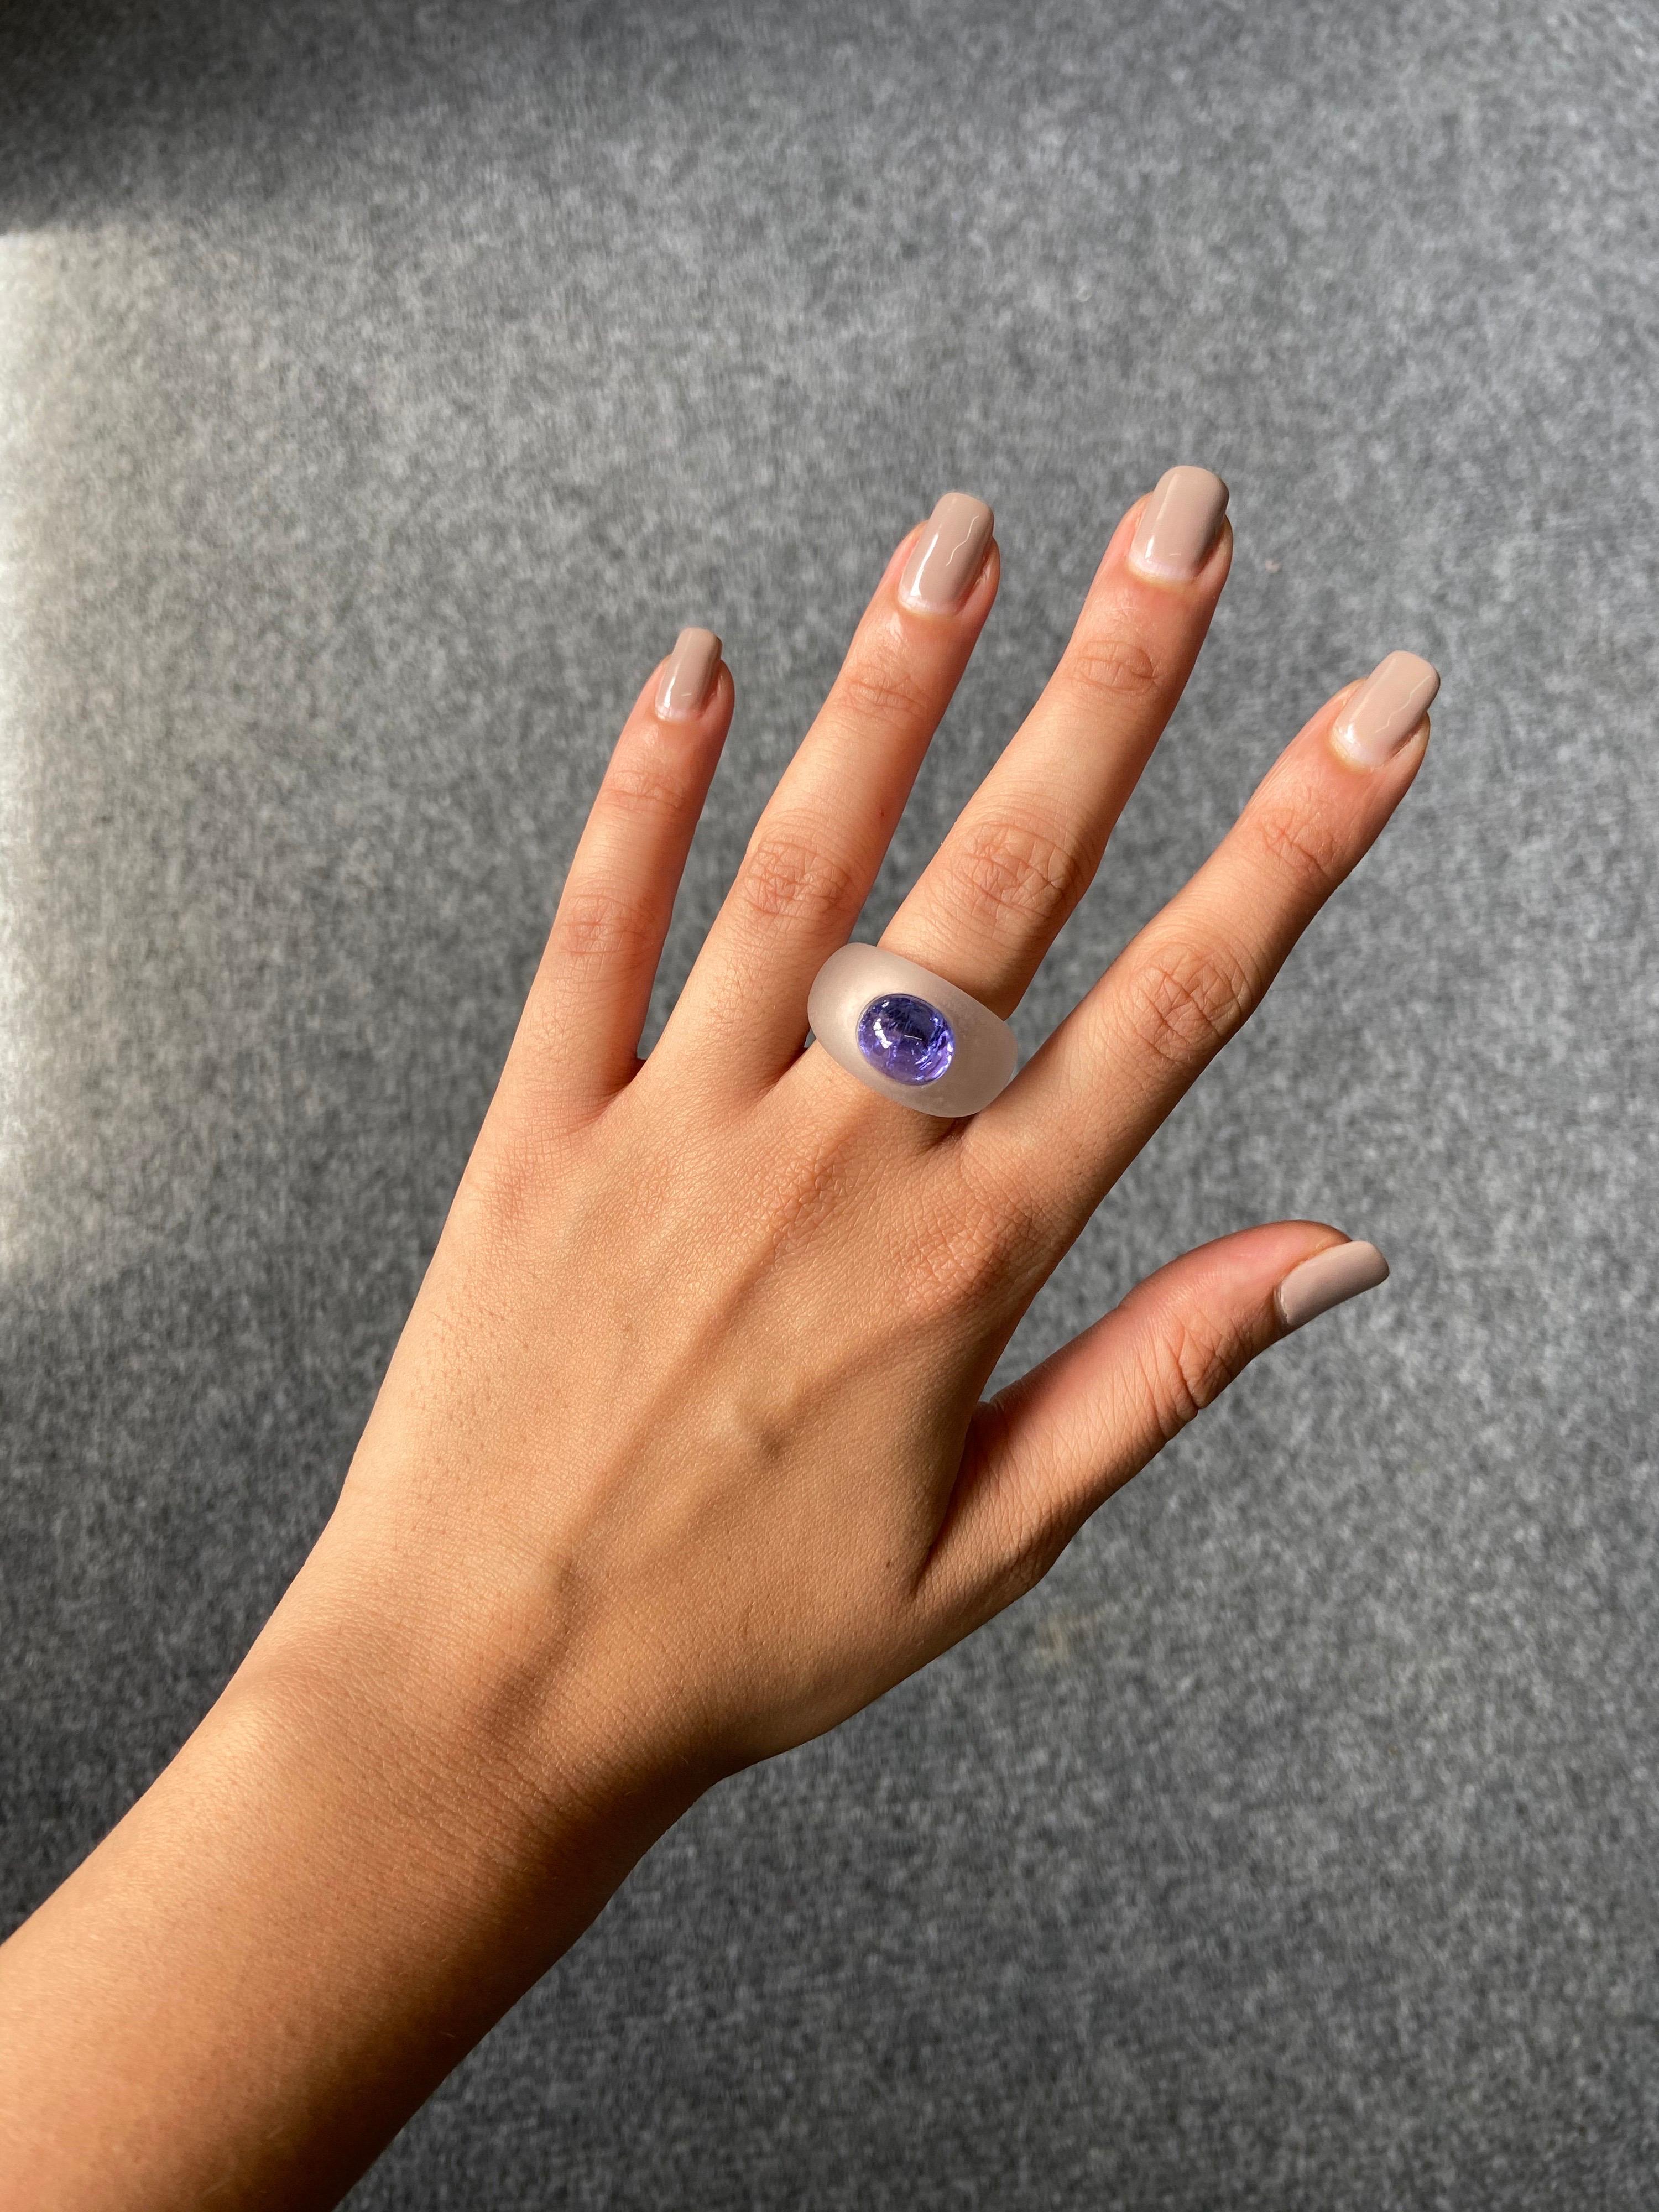 6.87 carats of Tanzanite Cabochon, studded in Rock Crystal. The natural Tanzanite is transparent, with naturally occuring inclusions making is a very unique stone. The ring is currently sized US 6, but it can be resized according to the client.